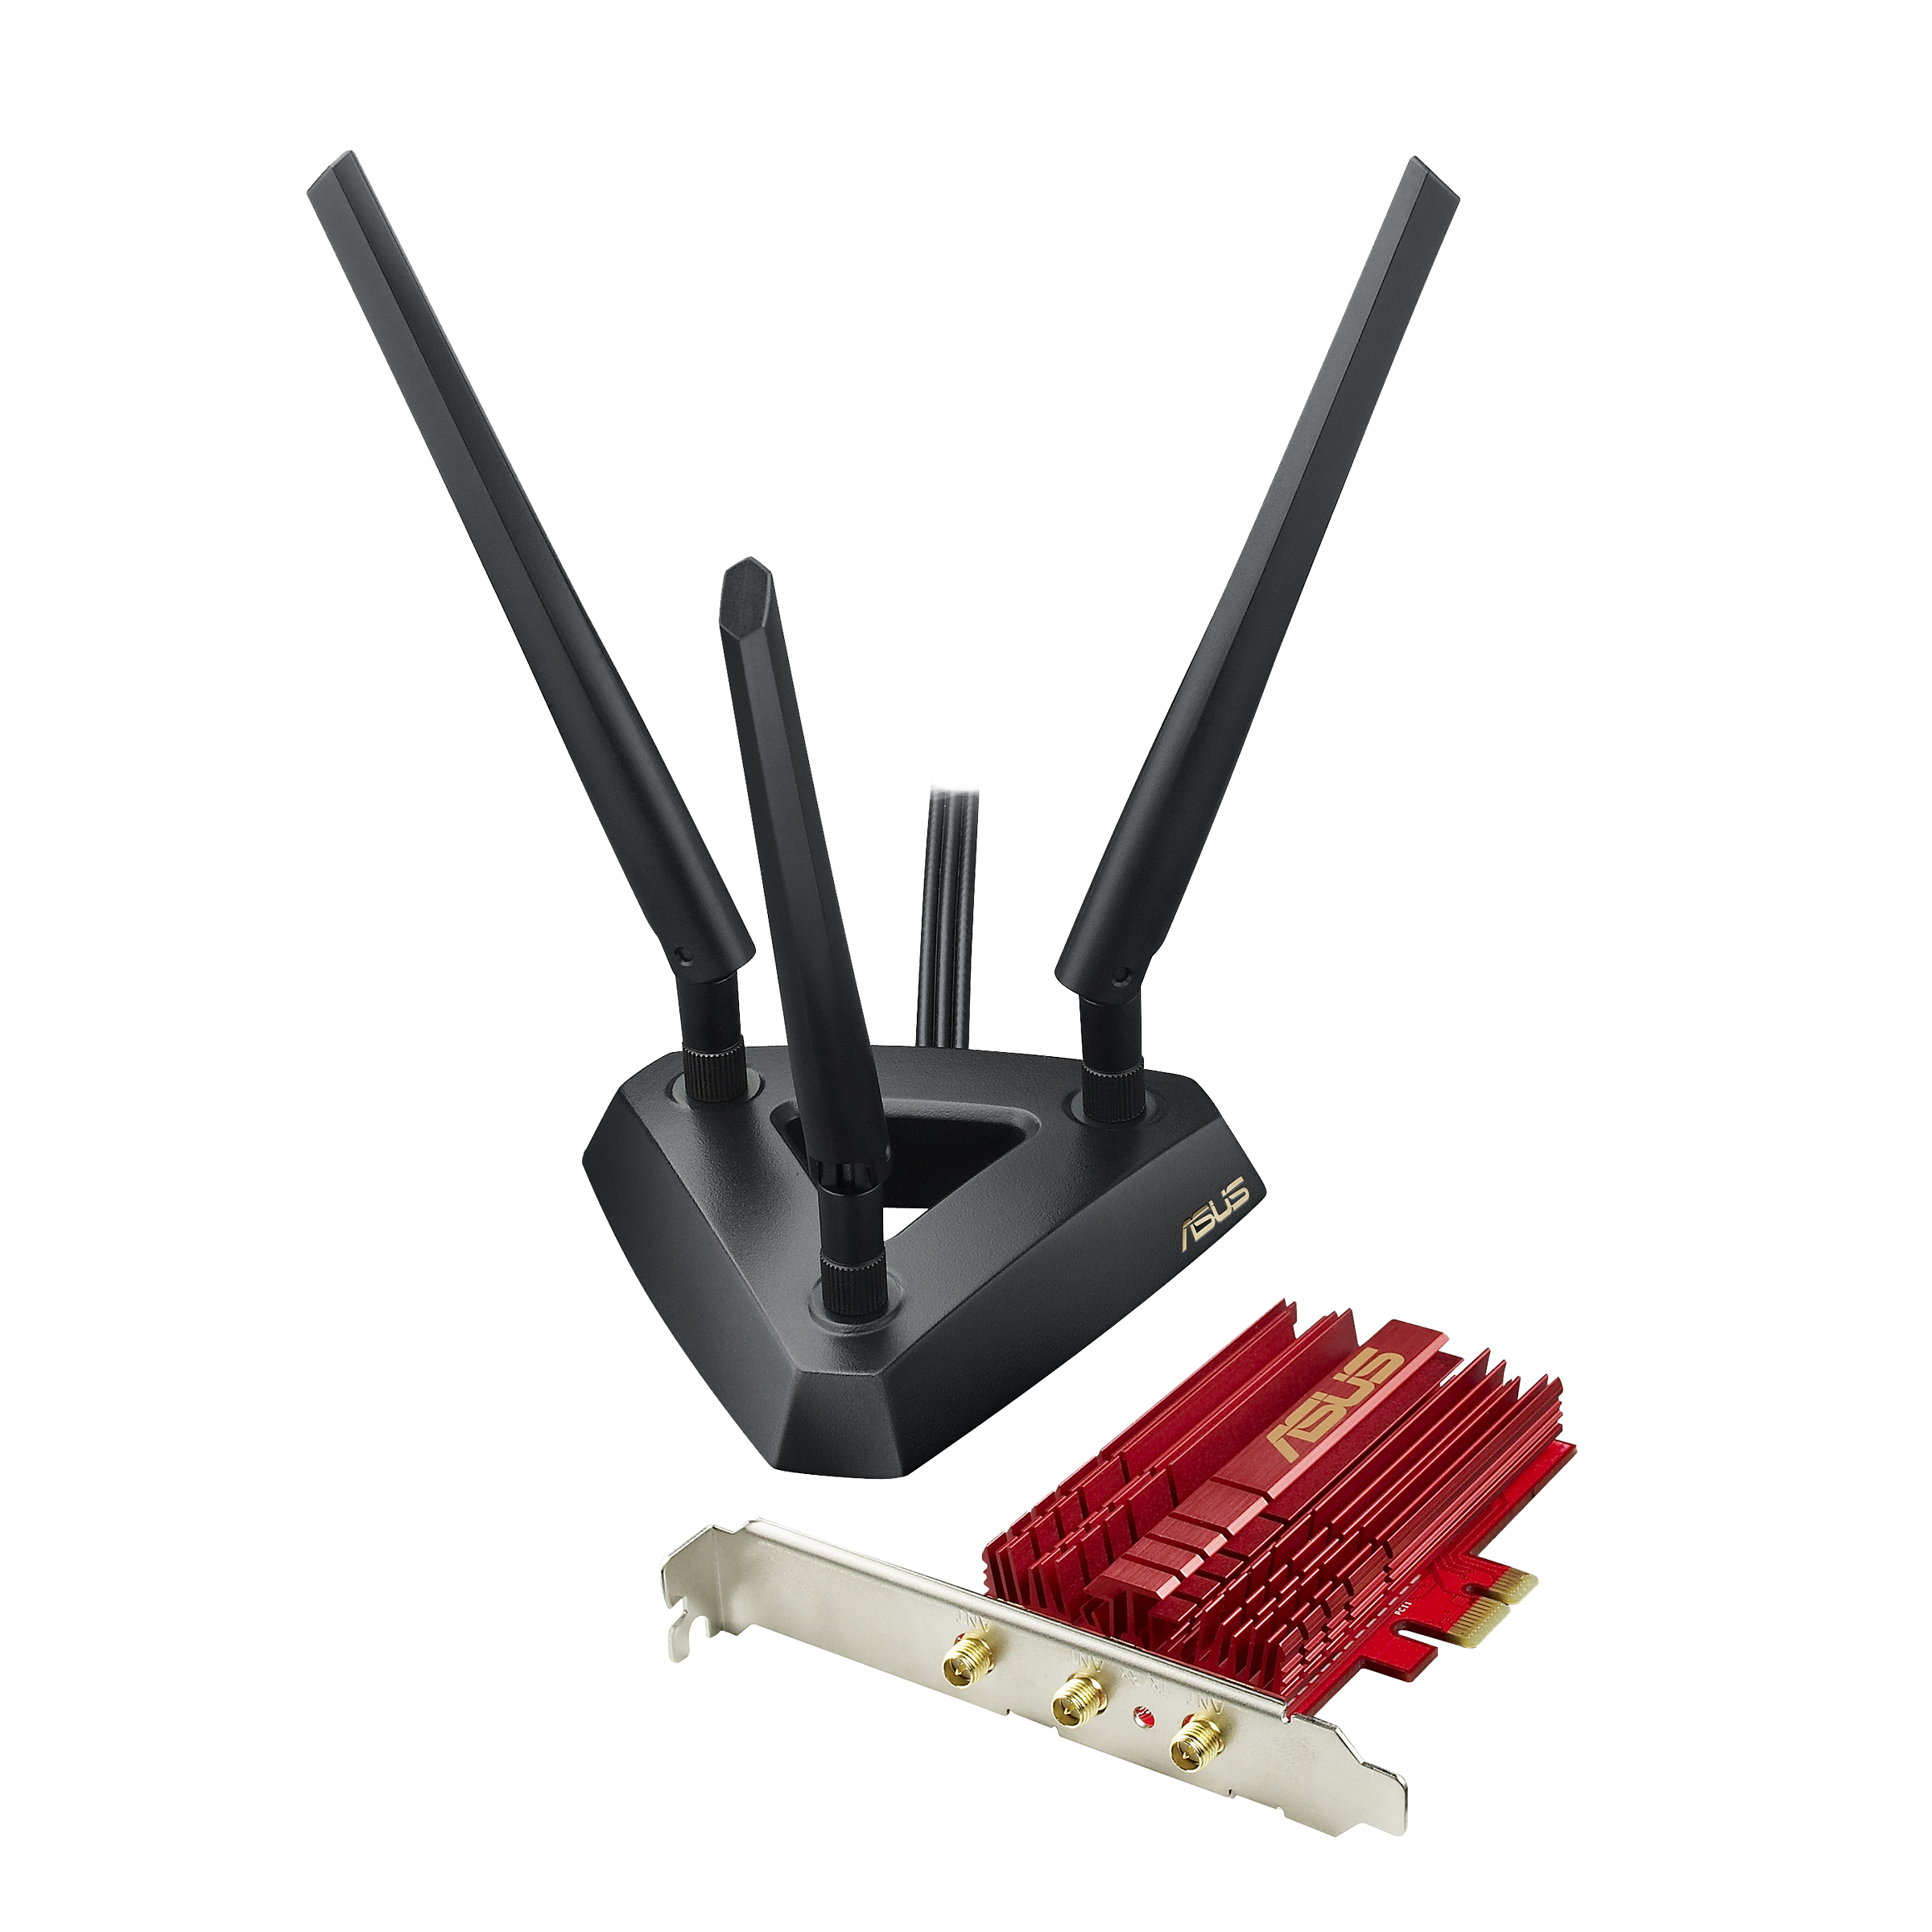 PCE-AC68｜Adapters｜ASUS Global